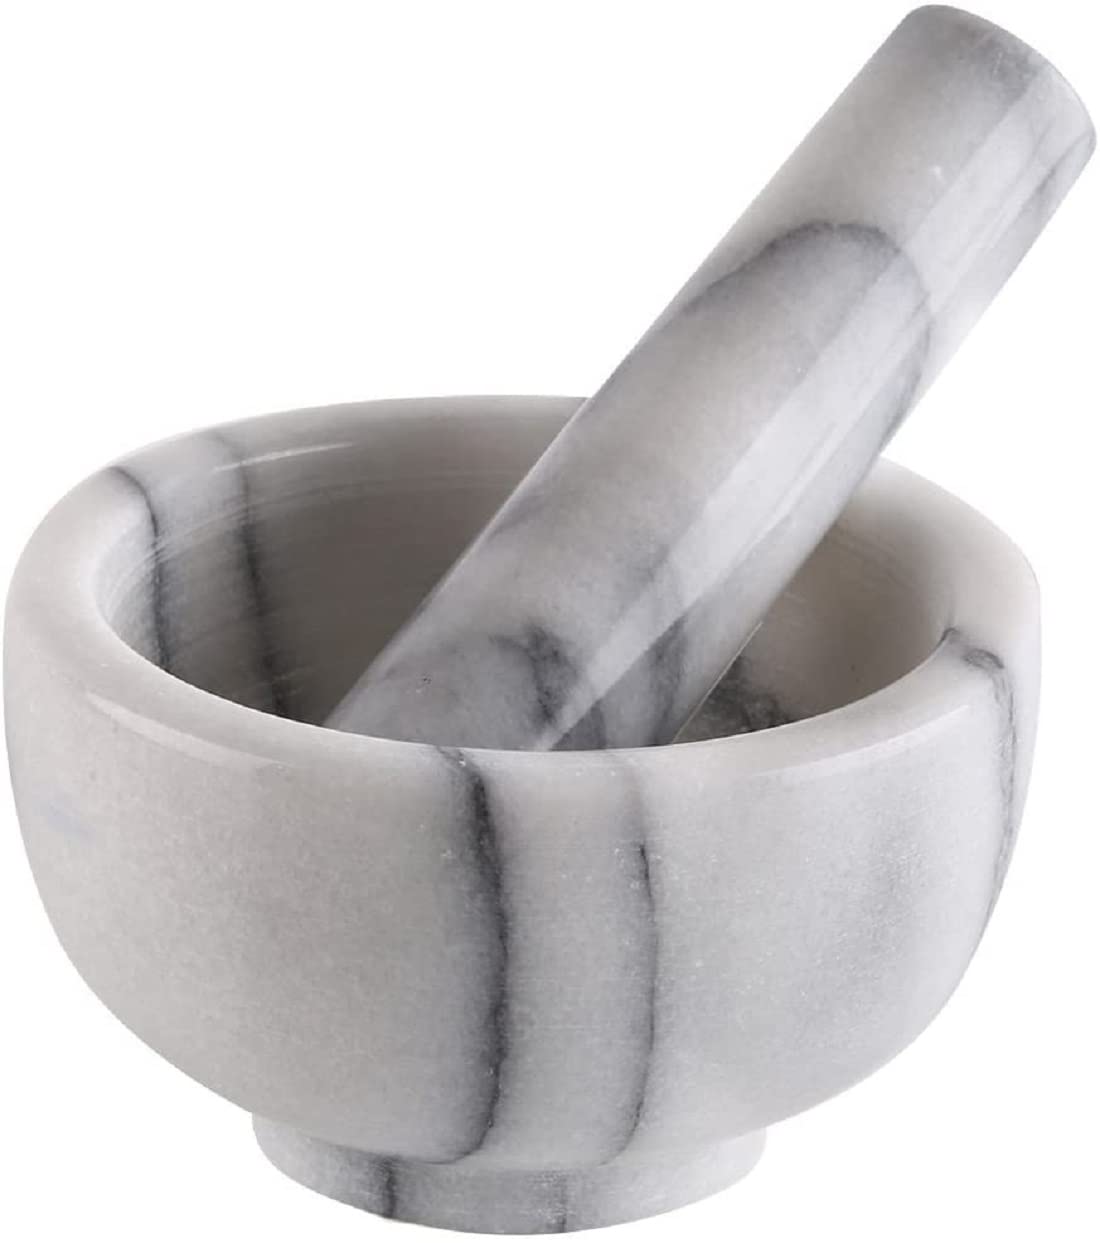 Greenco Mortar and Pestle Set, White Marble Stone Mortar and Pestle Grinding Bowl, Small 4.5 Inches, Kitchen Essential for Spices, Guacamole and More